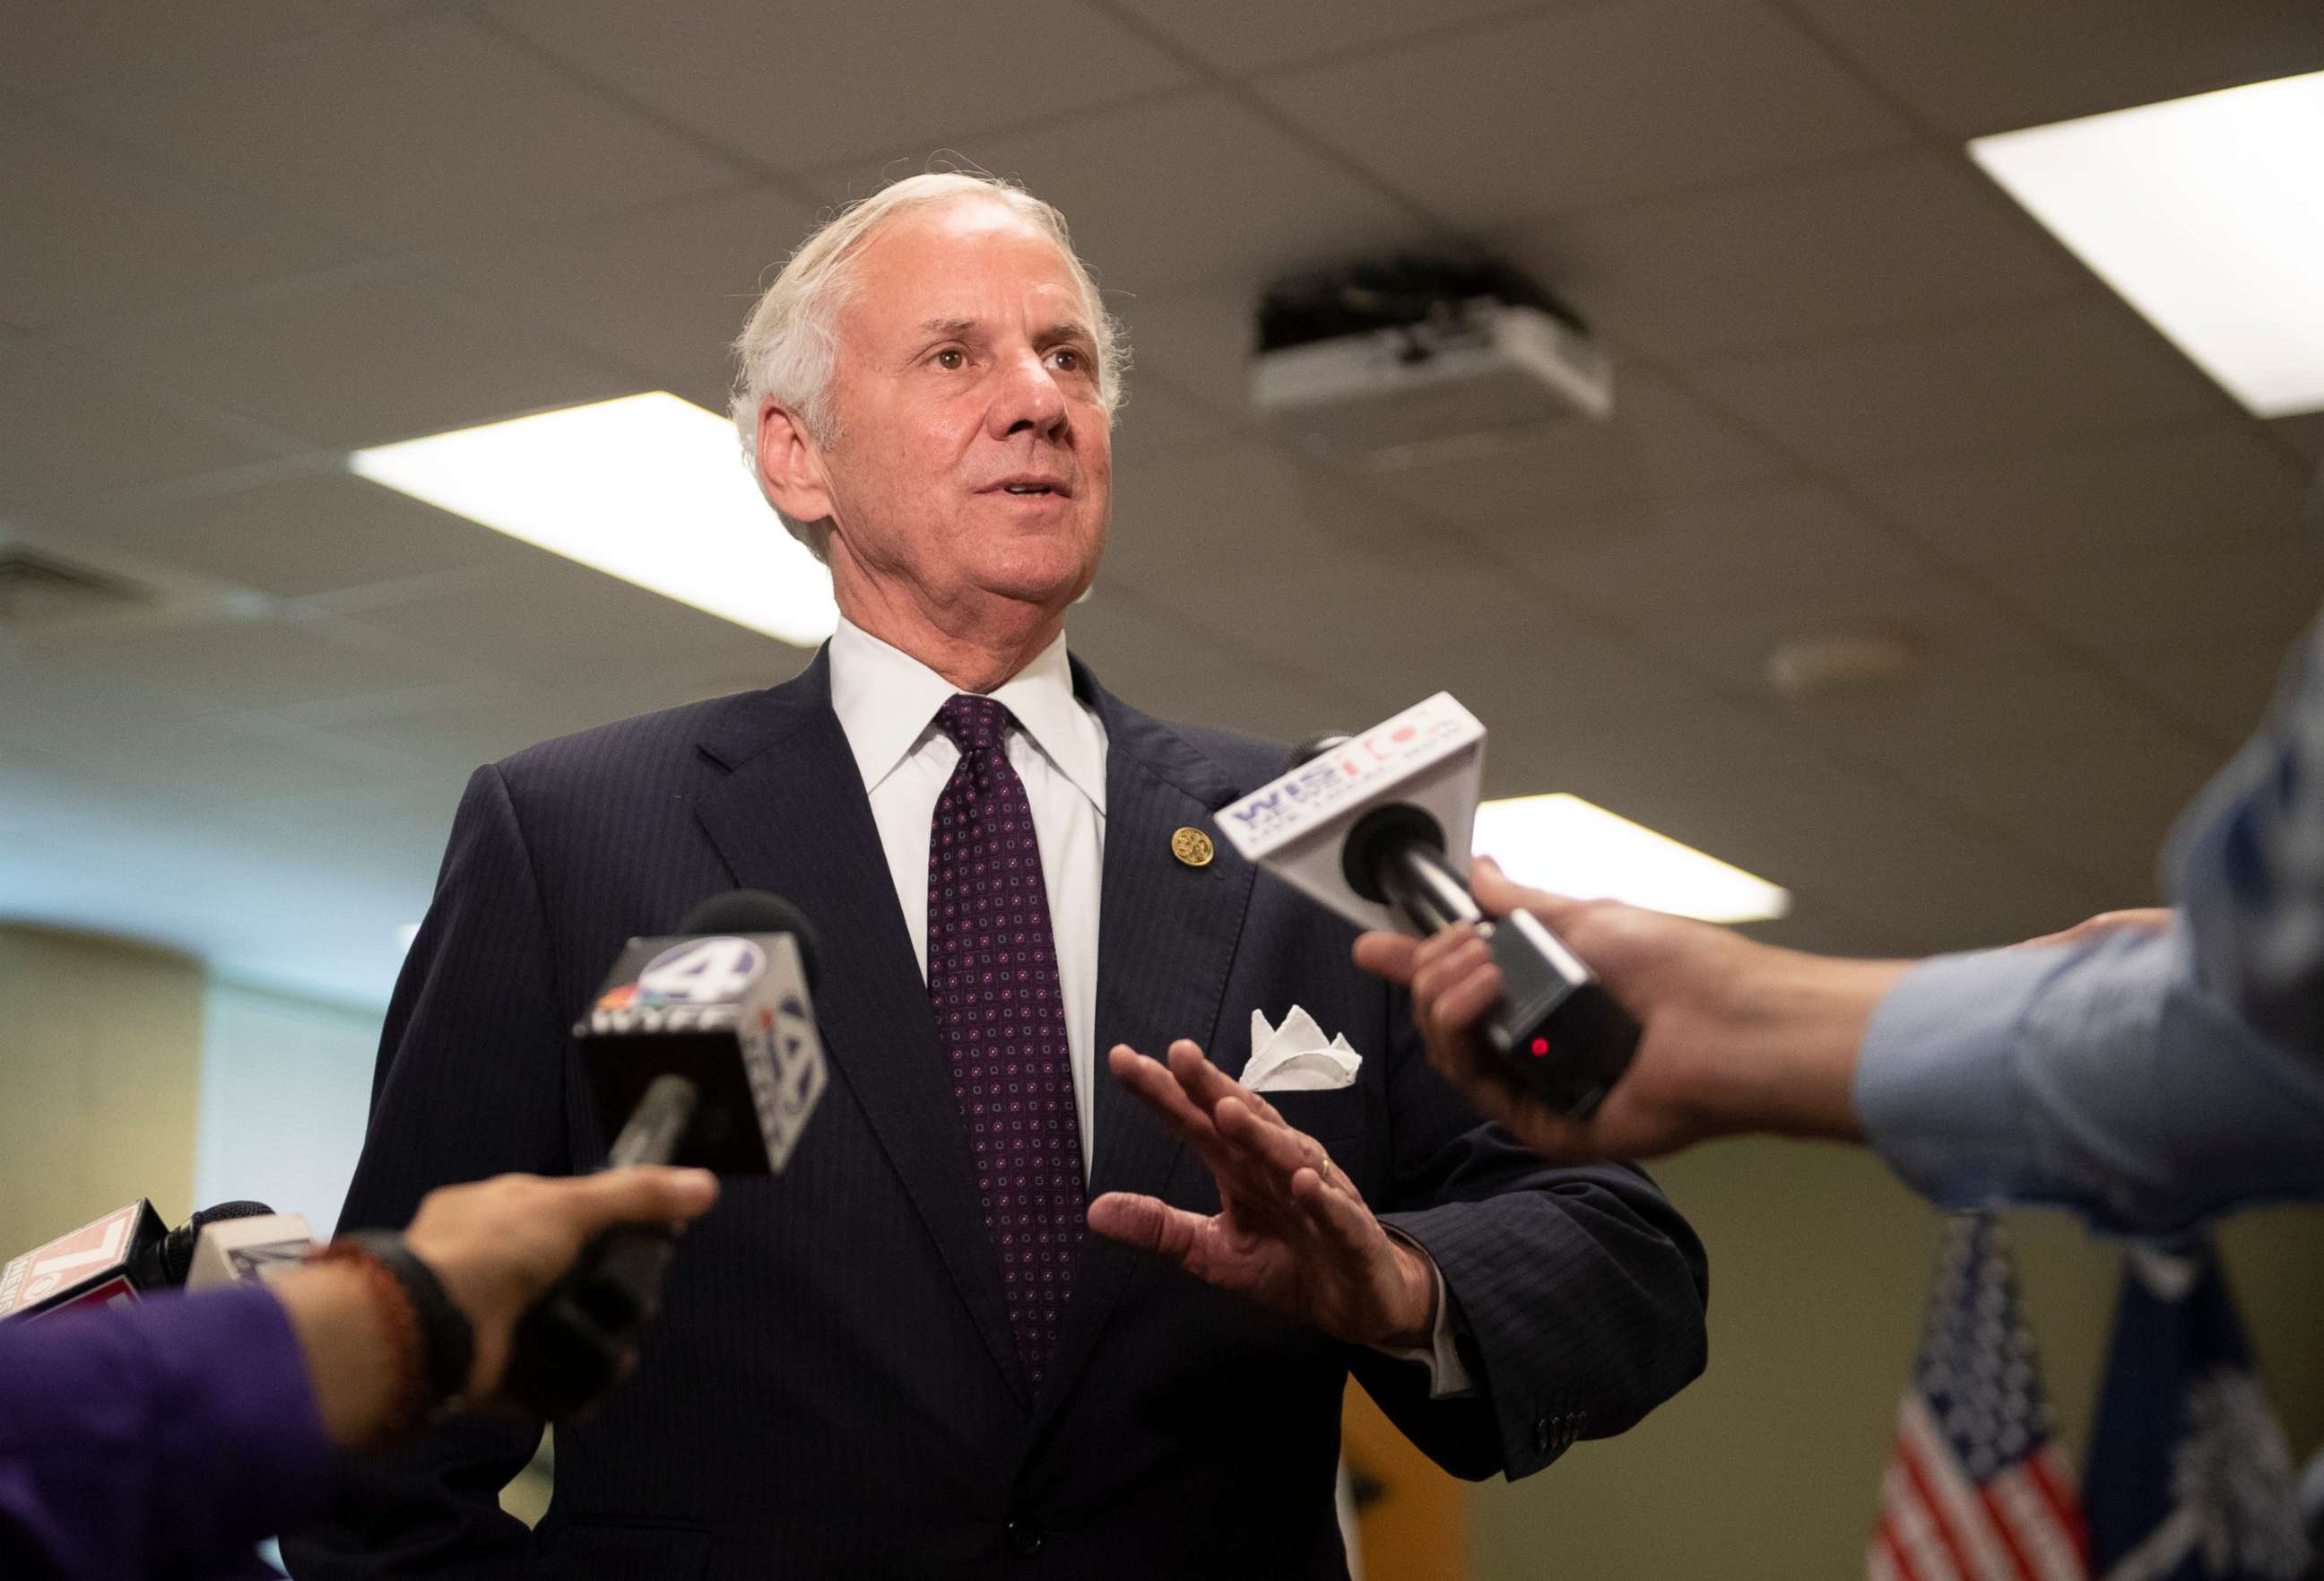 PHOTO: Gov. Henry McMaster speaks to members of the media following an event in Taylors, S.C., July 18, 2019.